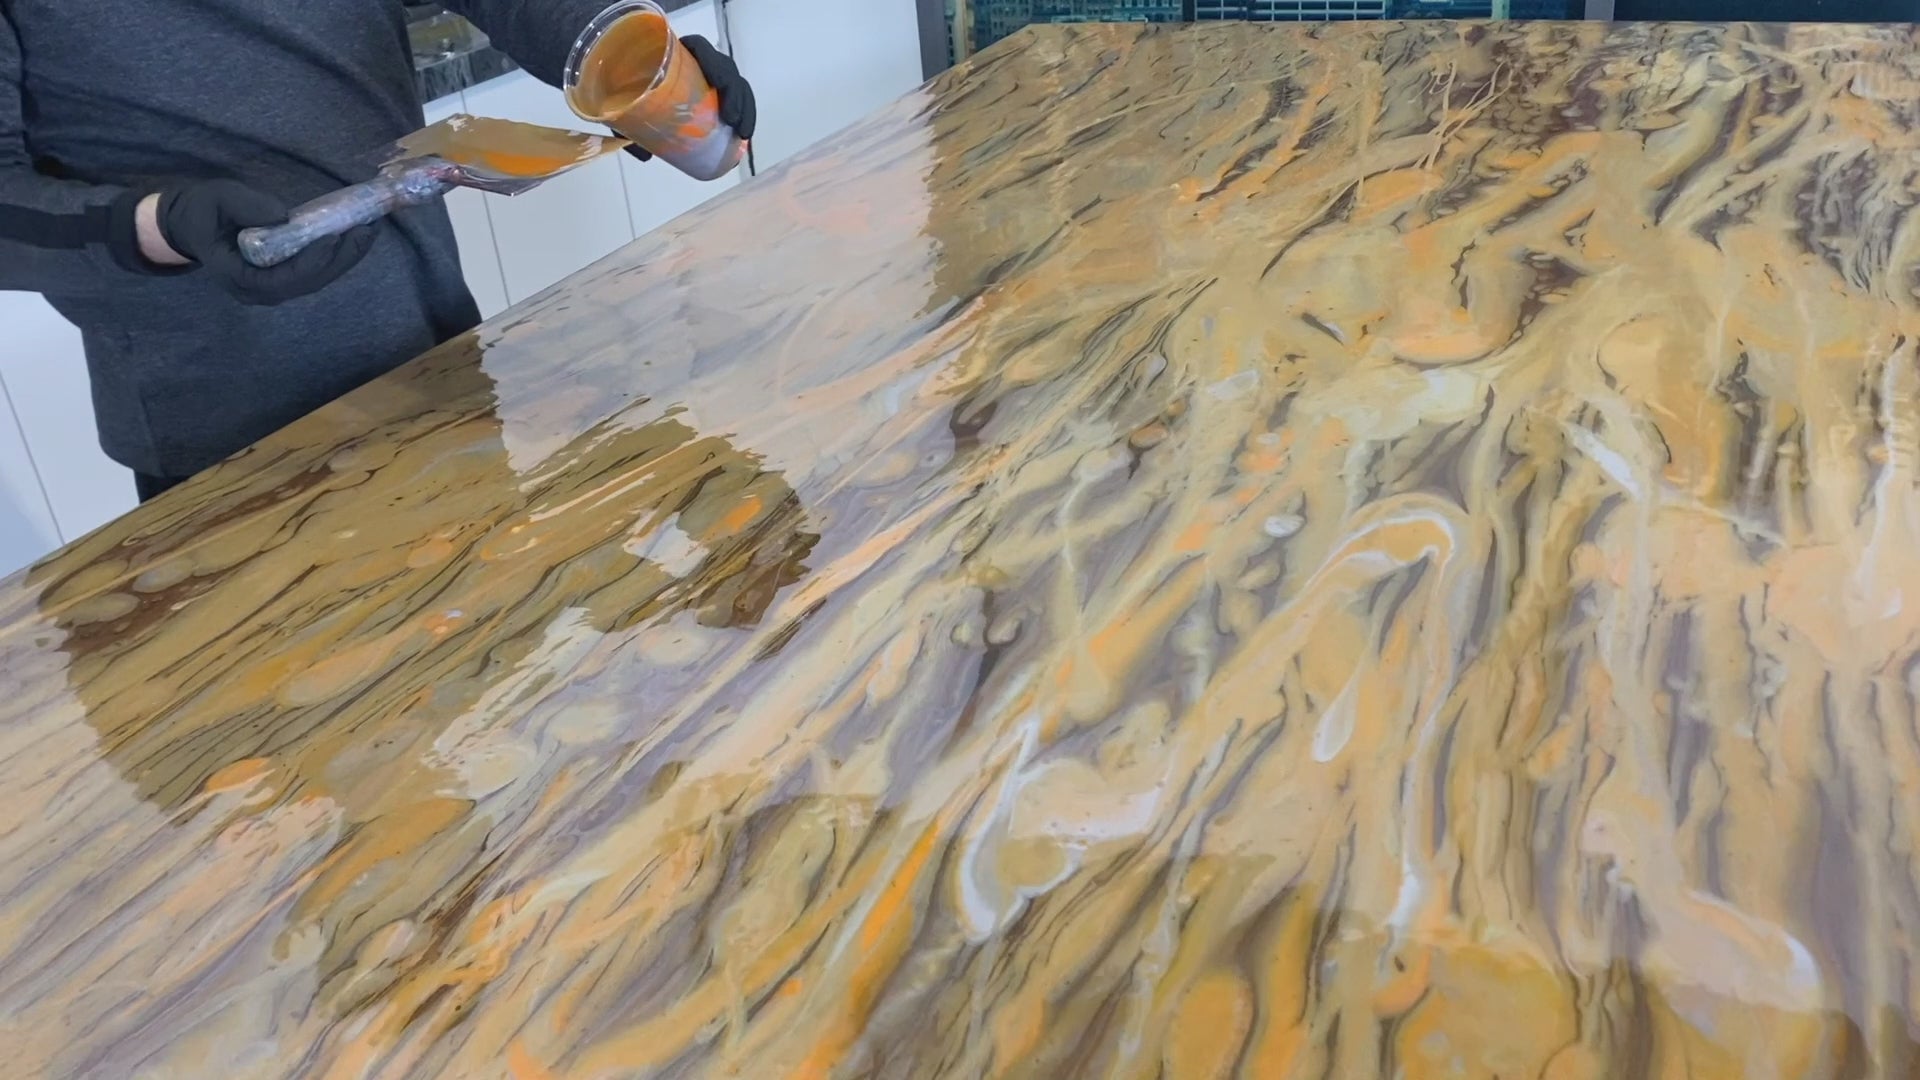 Easy Artful Transformation: Jona resins make creating a high-end surface surprisingly easy